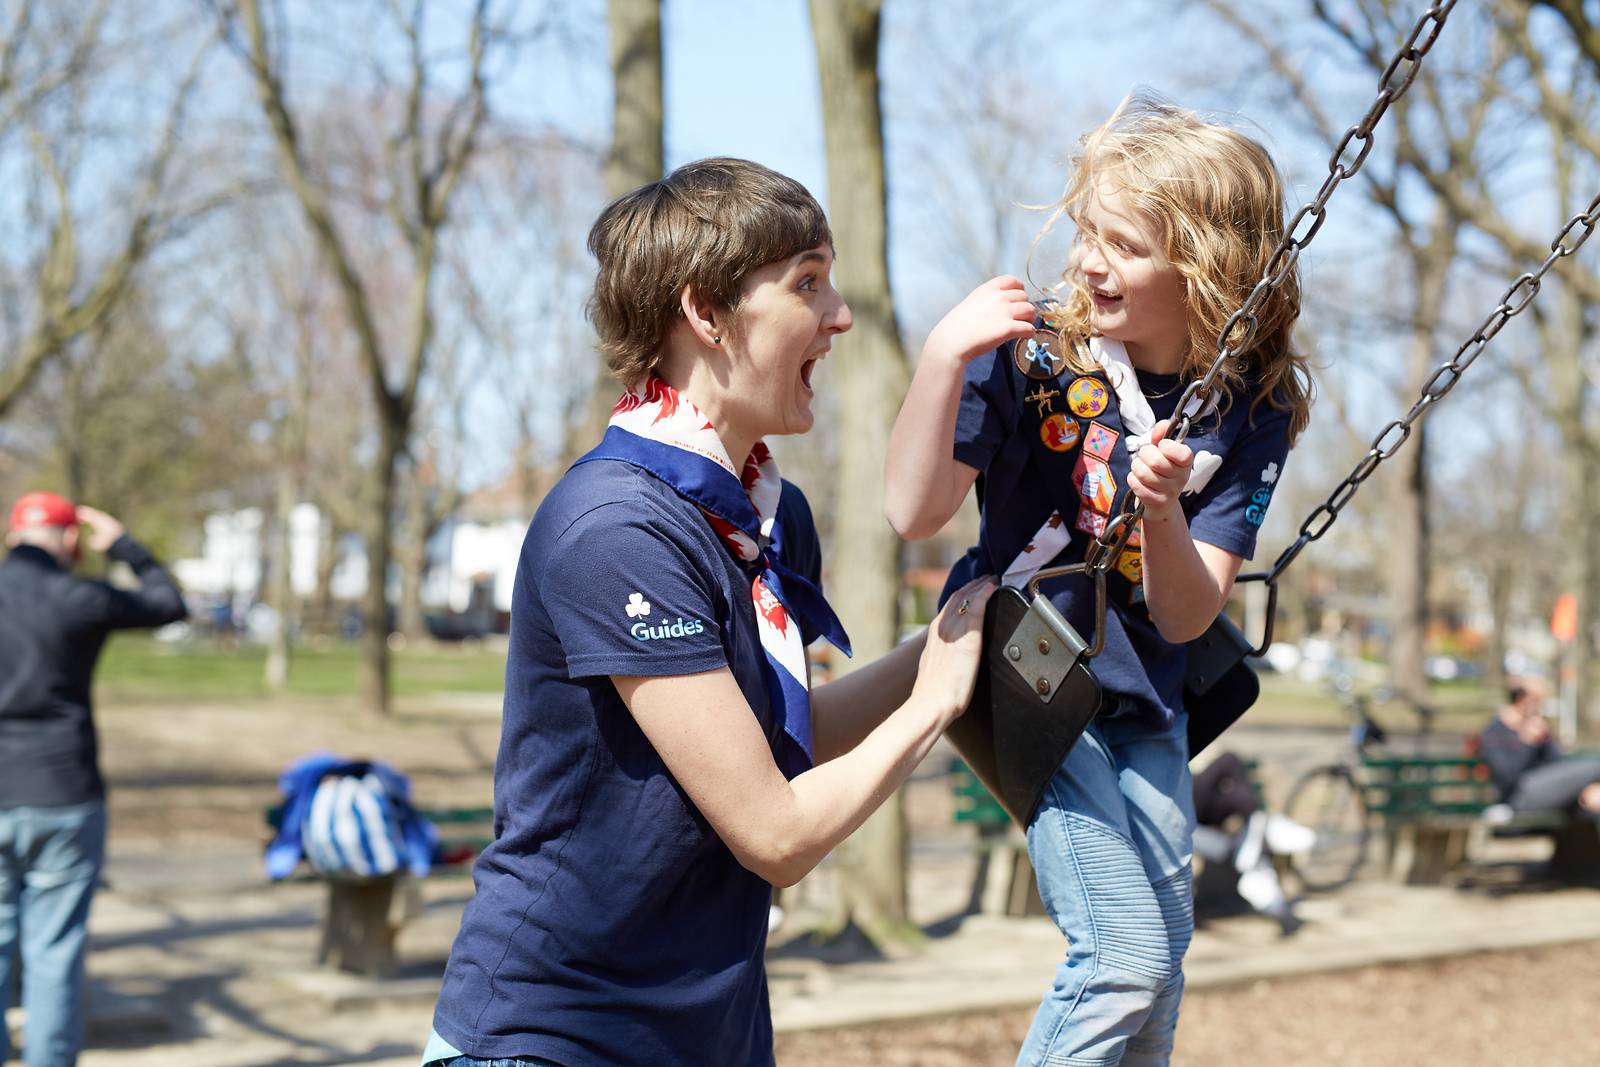 A young girl playing on a swing with a Girl Guides volunteer. The volunteer is making a face with a big smile at the girl.